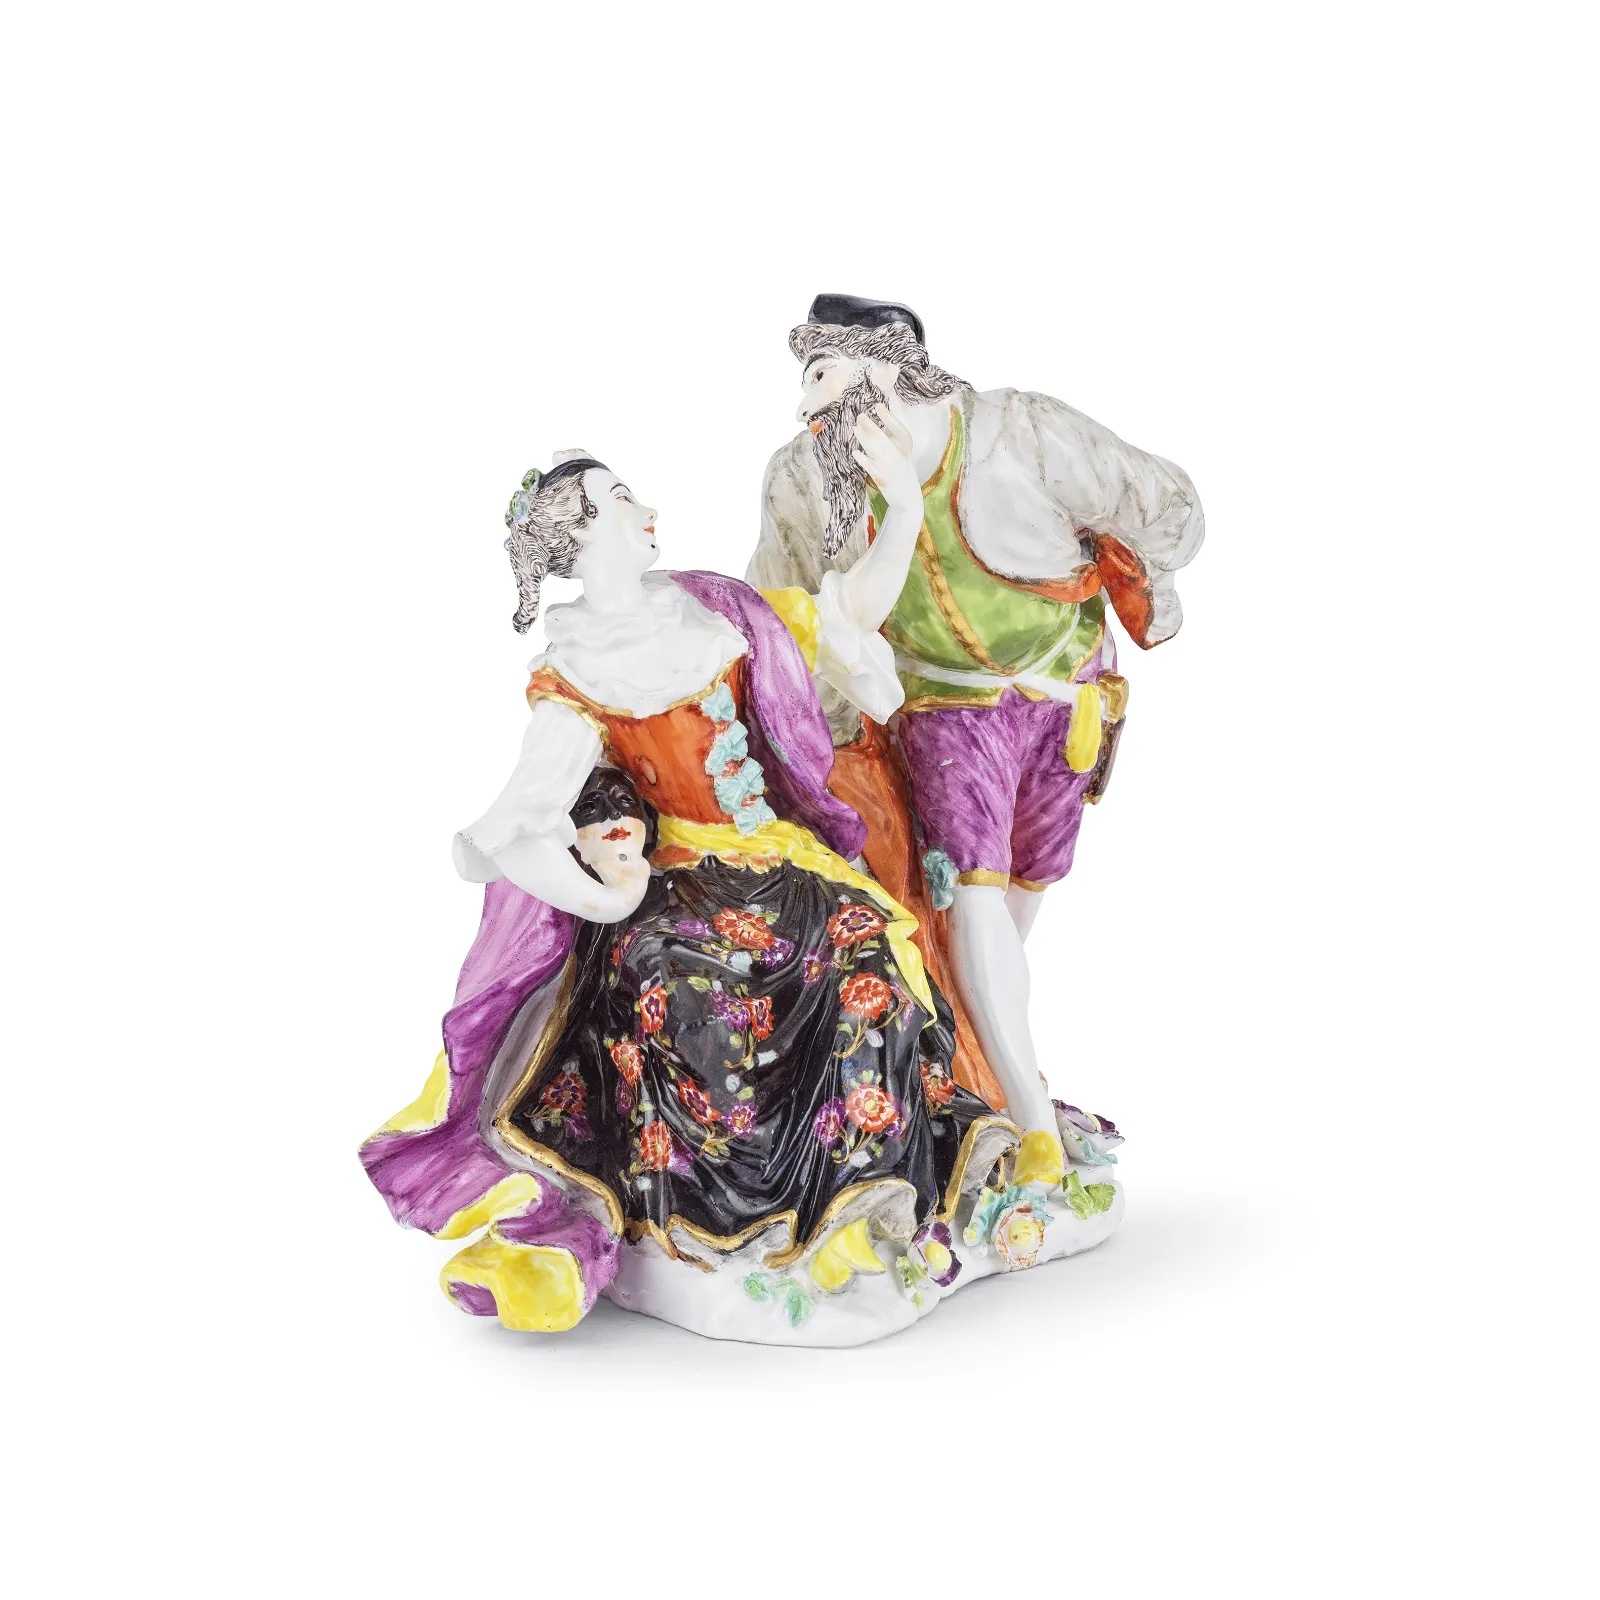 Circa-1738 Meissen Pantalone and Columbine group by Kaendler, which sold for €82,550 ($88,335) with buyer's premium at Bonhams Paris.